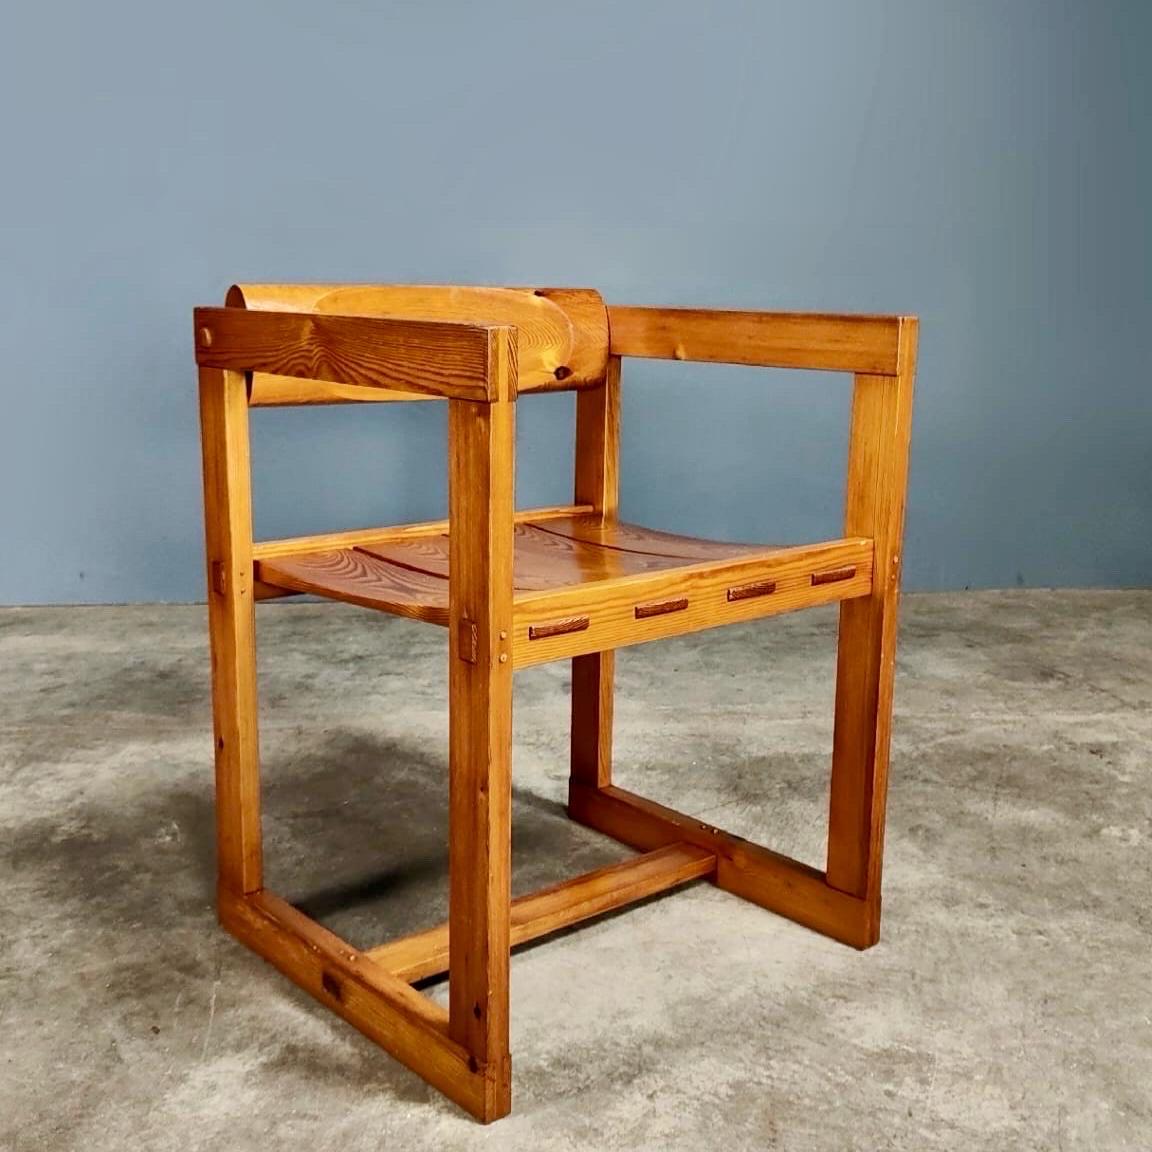 6 x Edvin Helseth Trybo Fureka 313 Pine Brutalist Dining Chairs Stange Bruk In Excellent Condition For Sale In Cambridge, GB